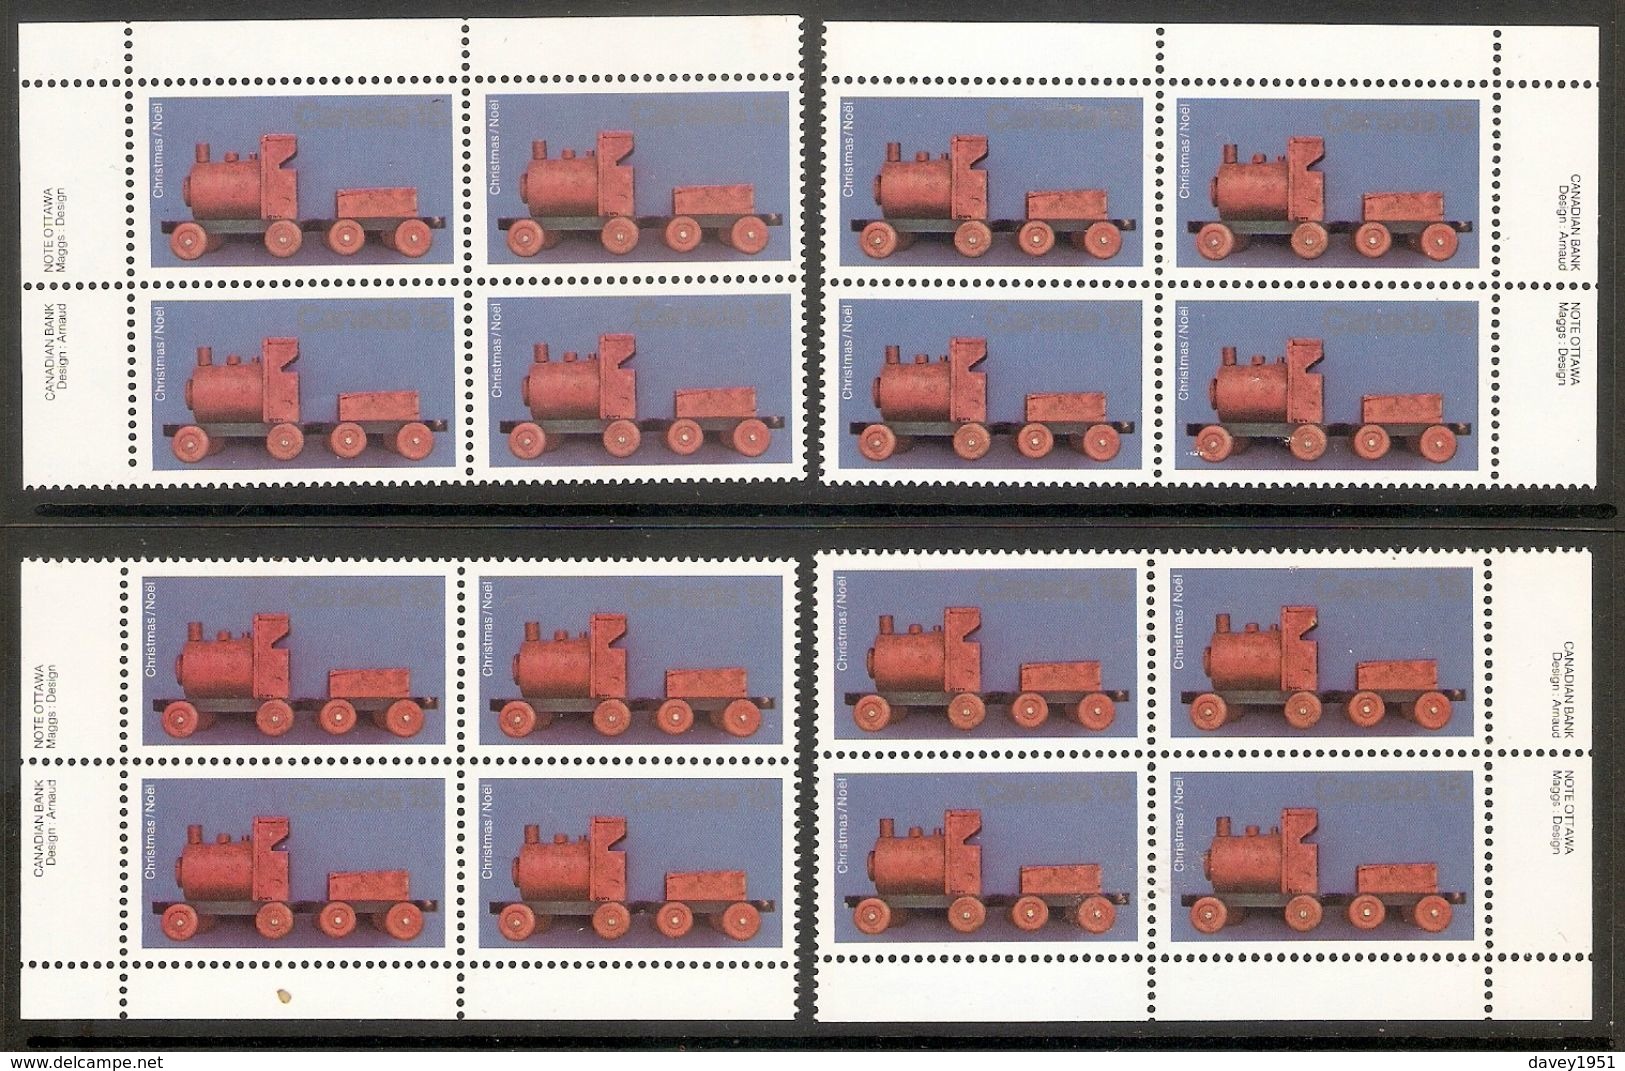 001520 Canada 1979 Christmas Set Of Plate Blocks MNH (3 Scans) - Plate Number & Inscriptions